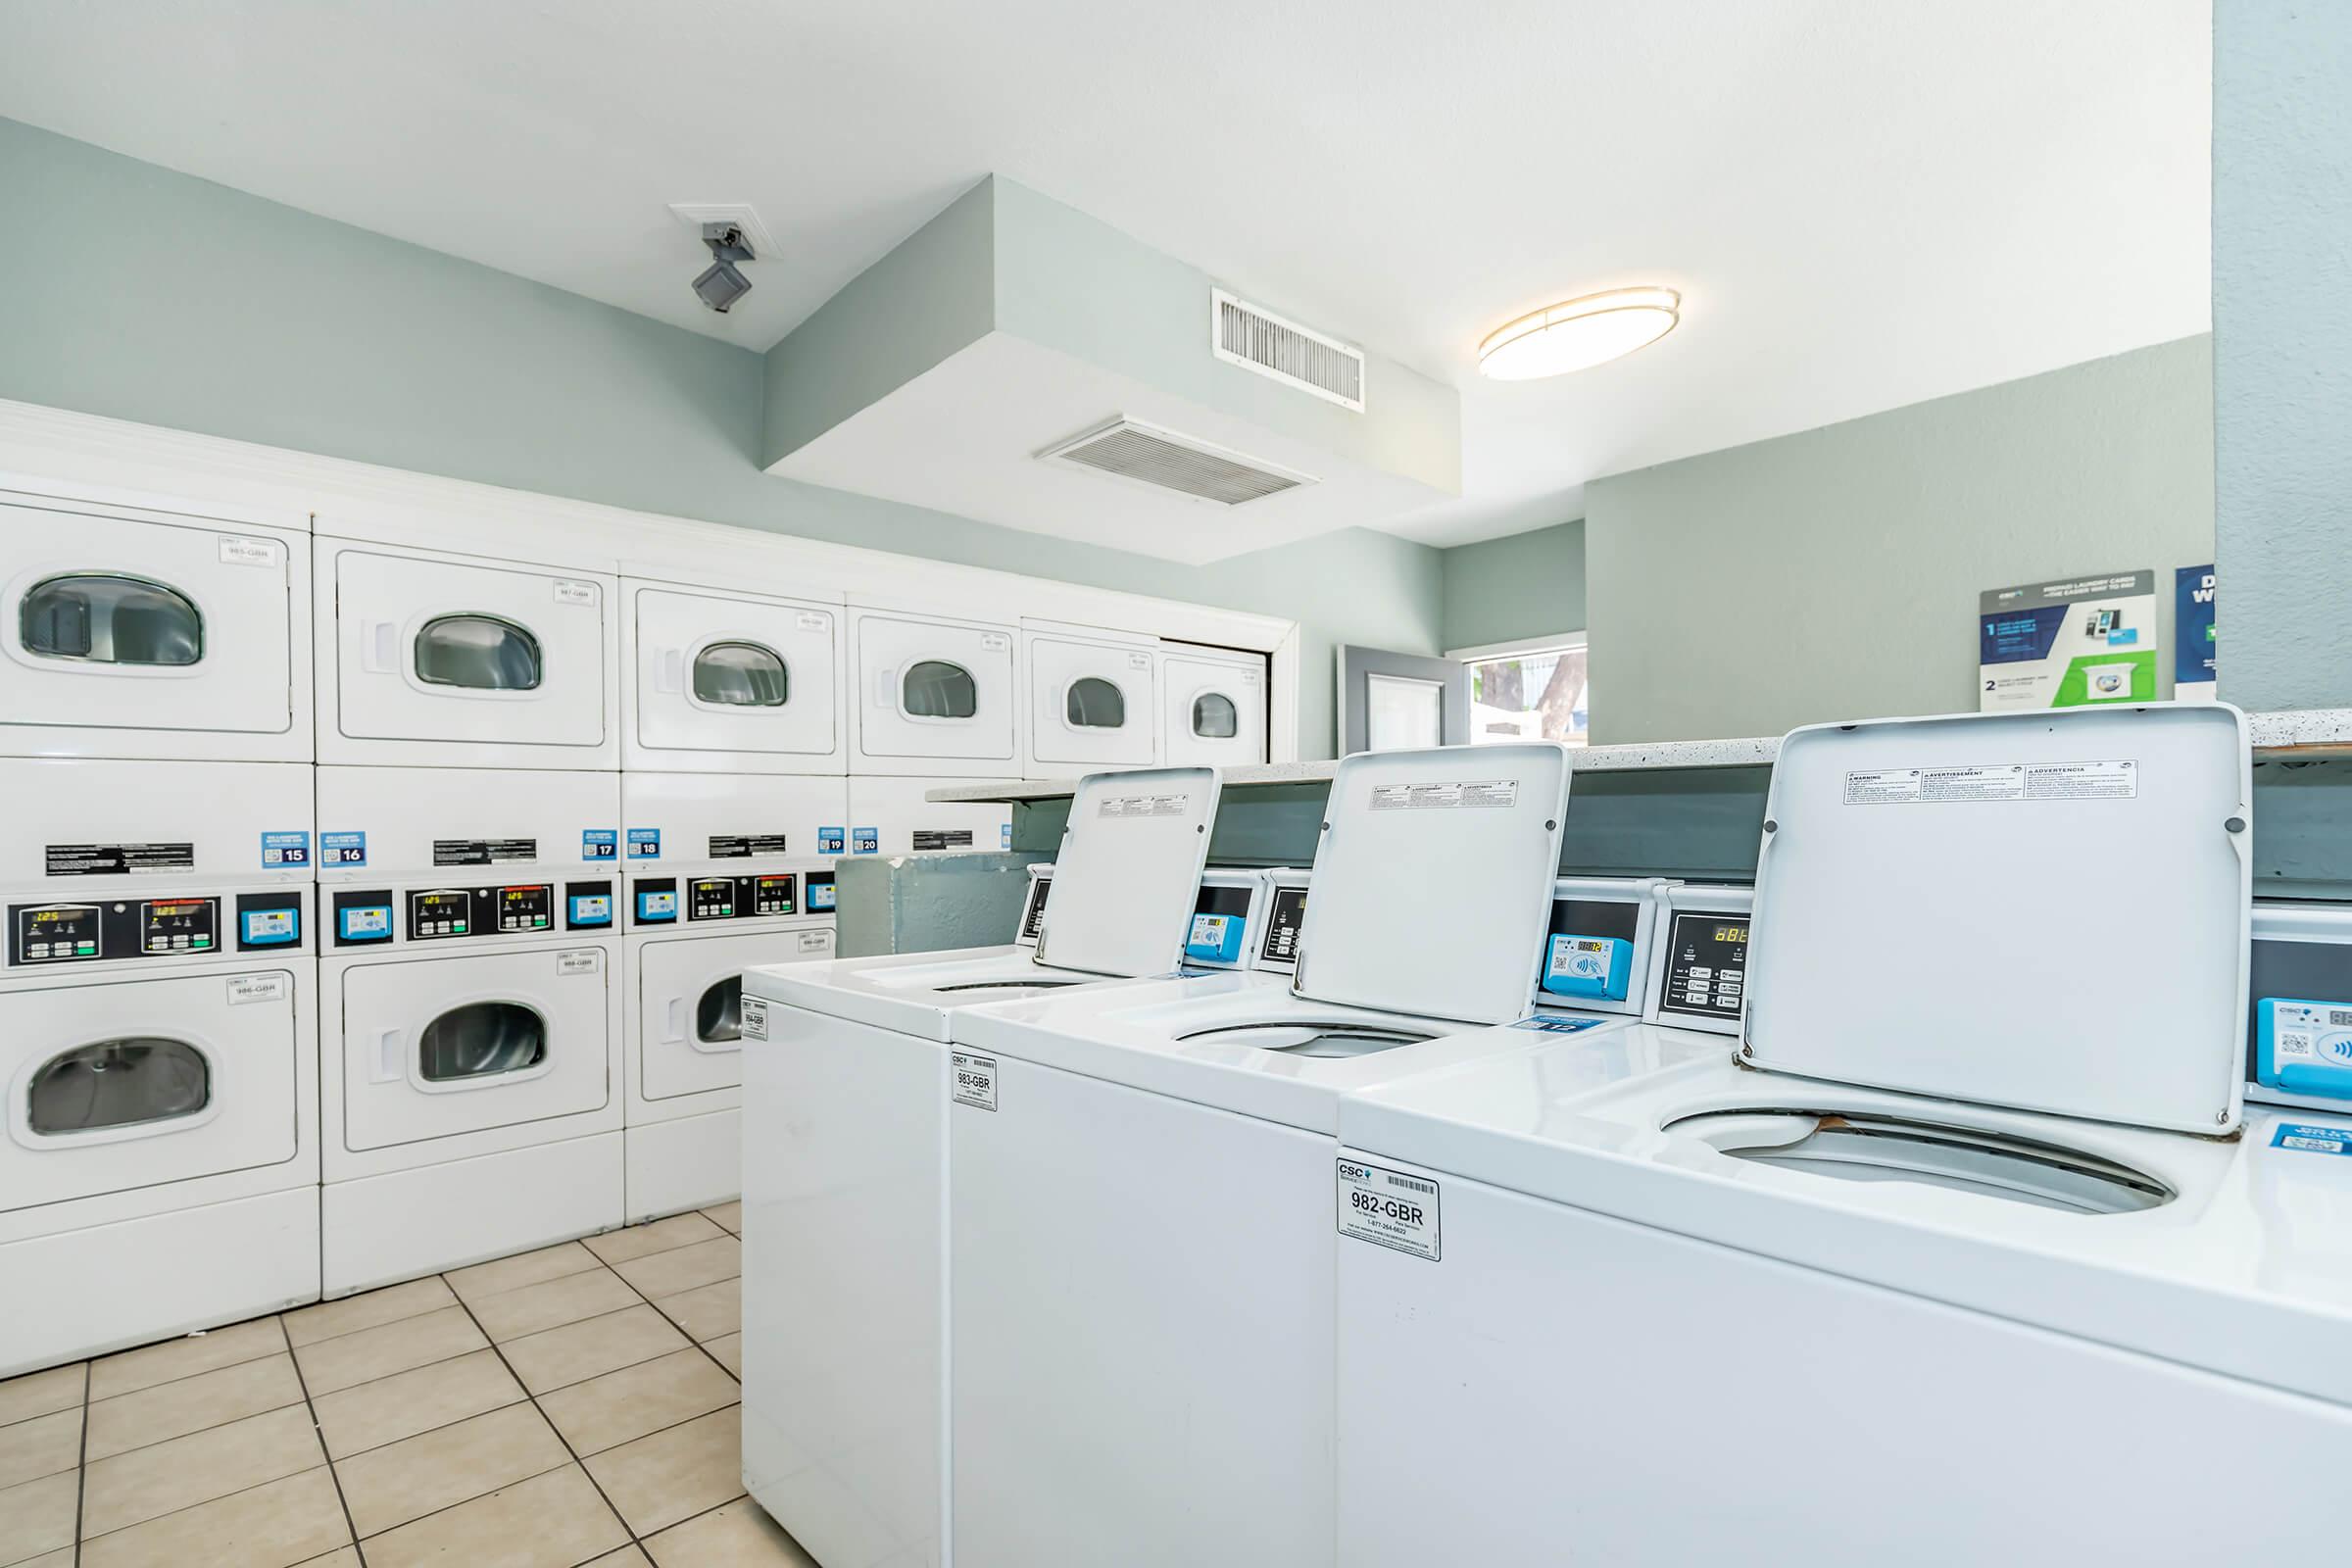 Washers and dryers in a shared laundry space